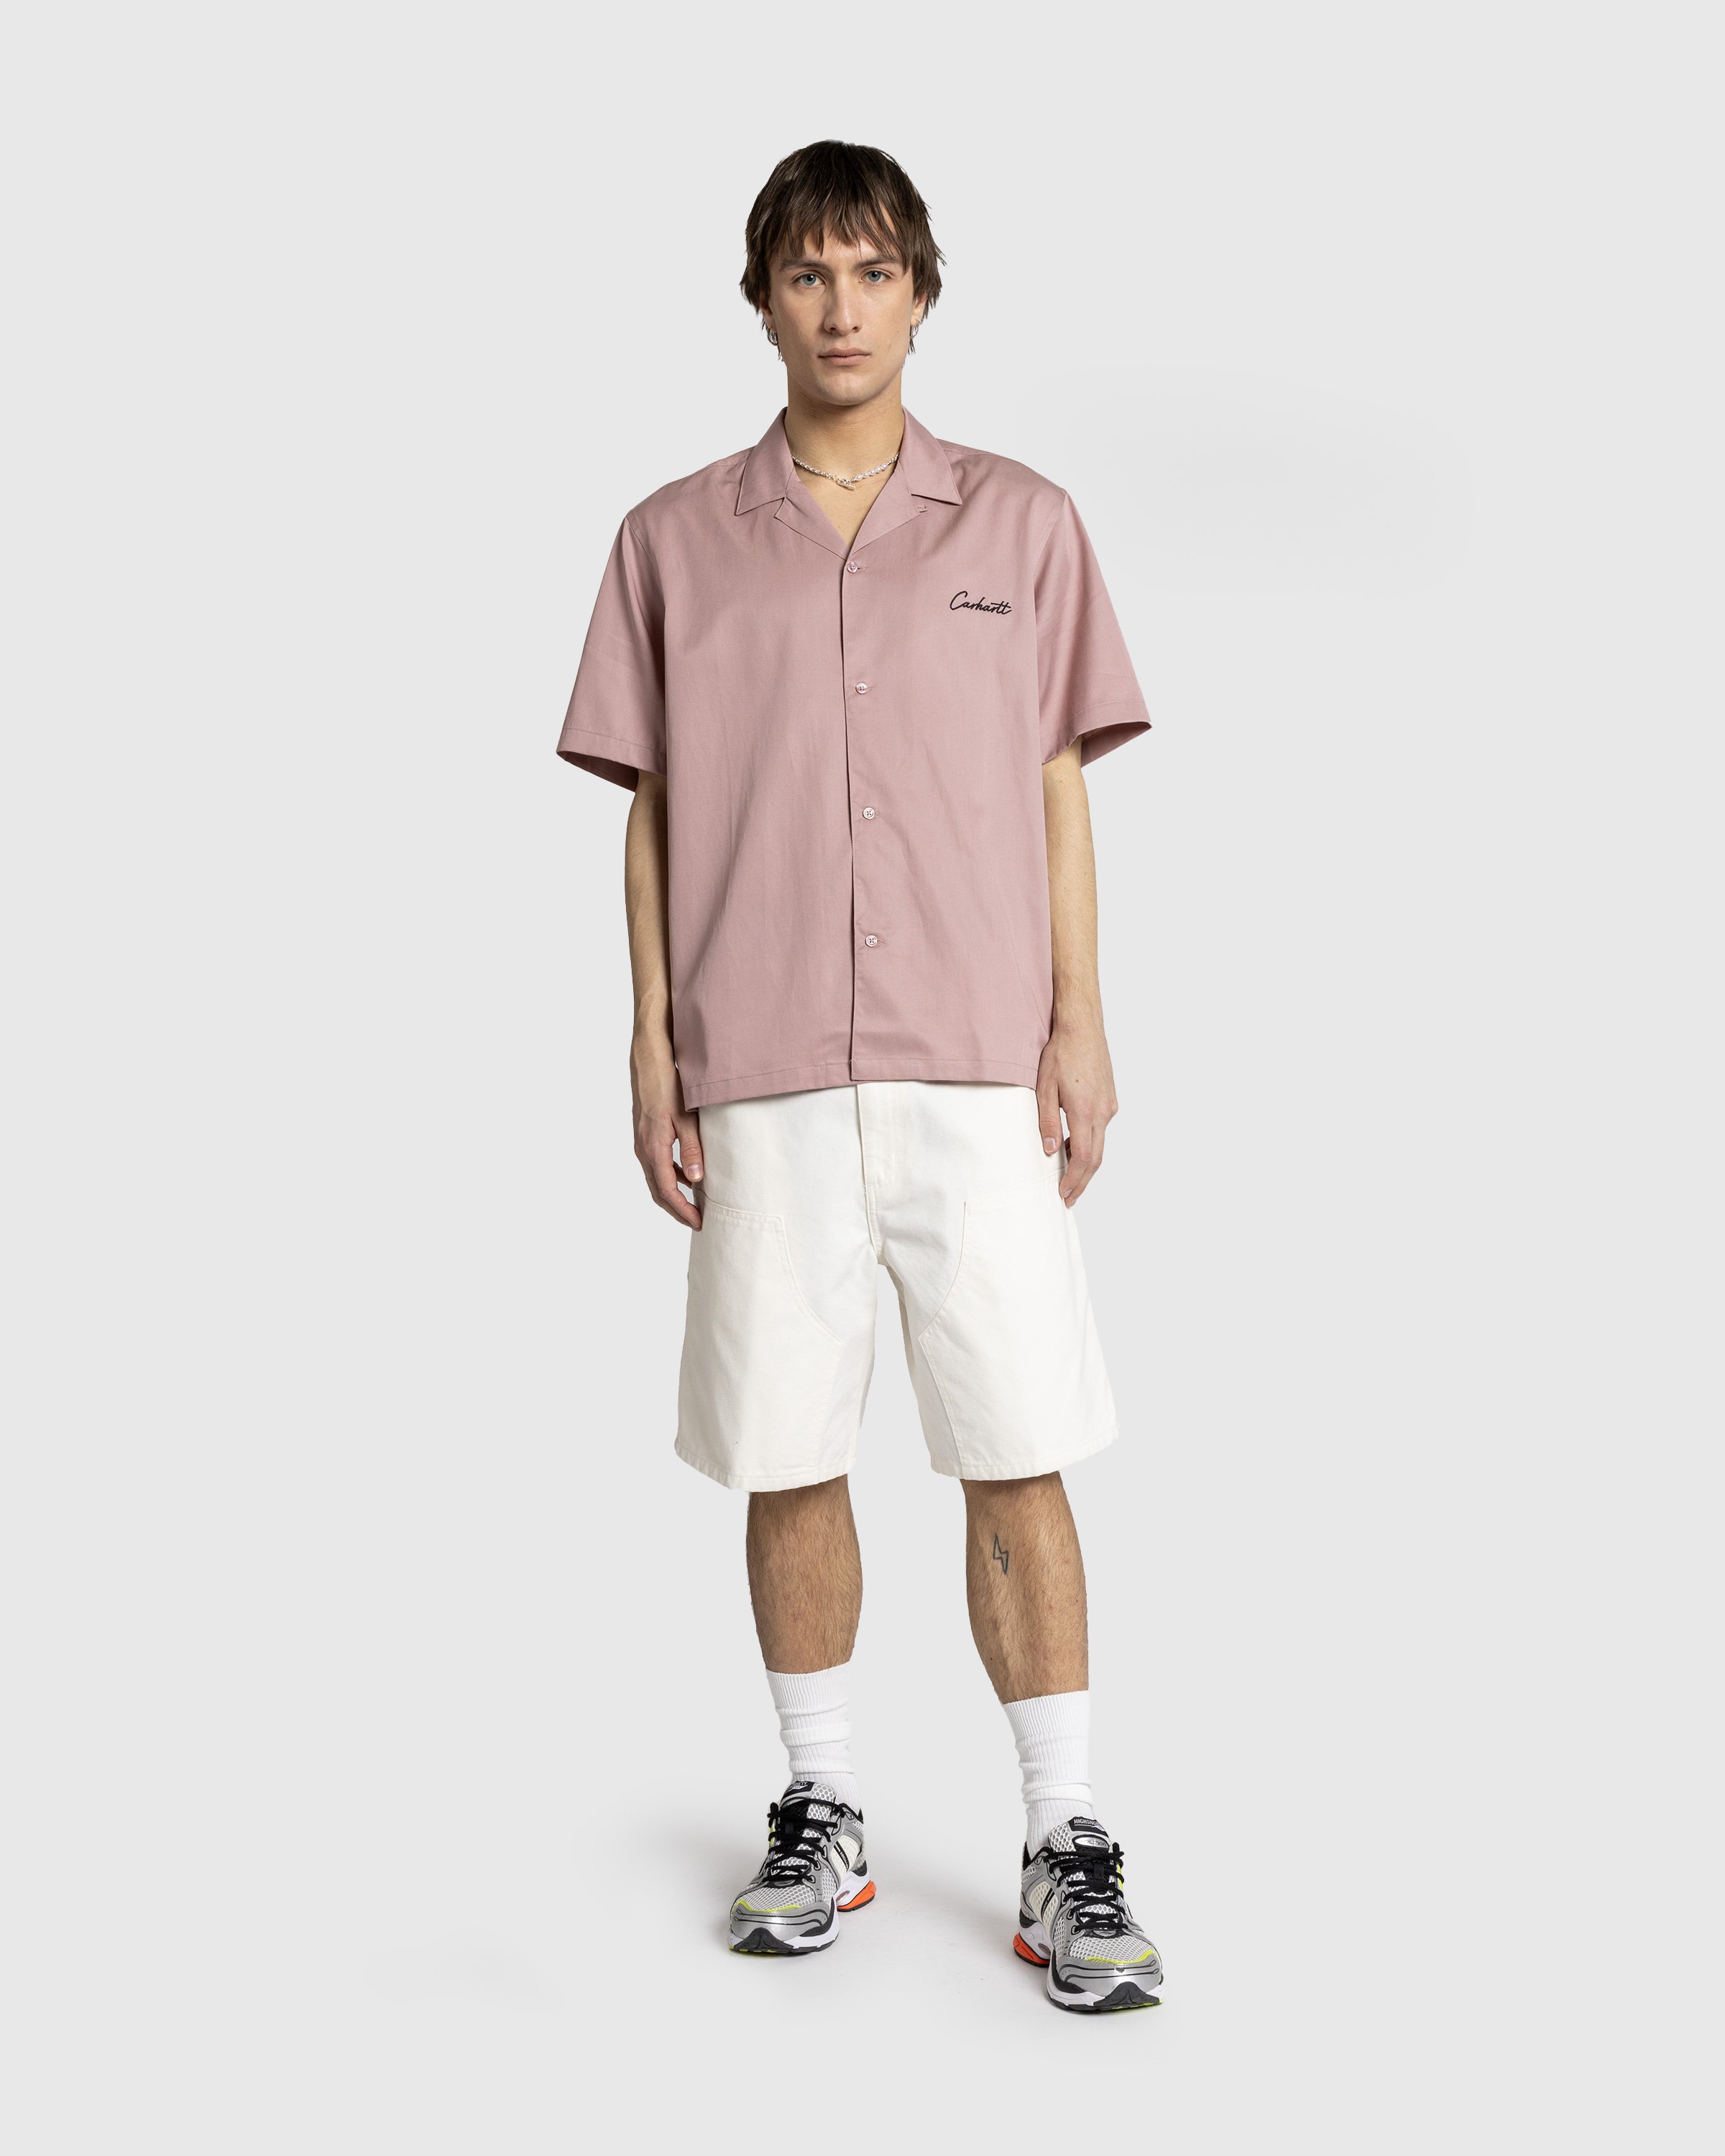 Carhartt WIP - Double Knee Short Wax /rinsed - Clothing - White - Image 3